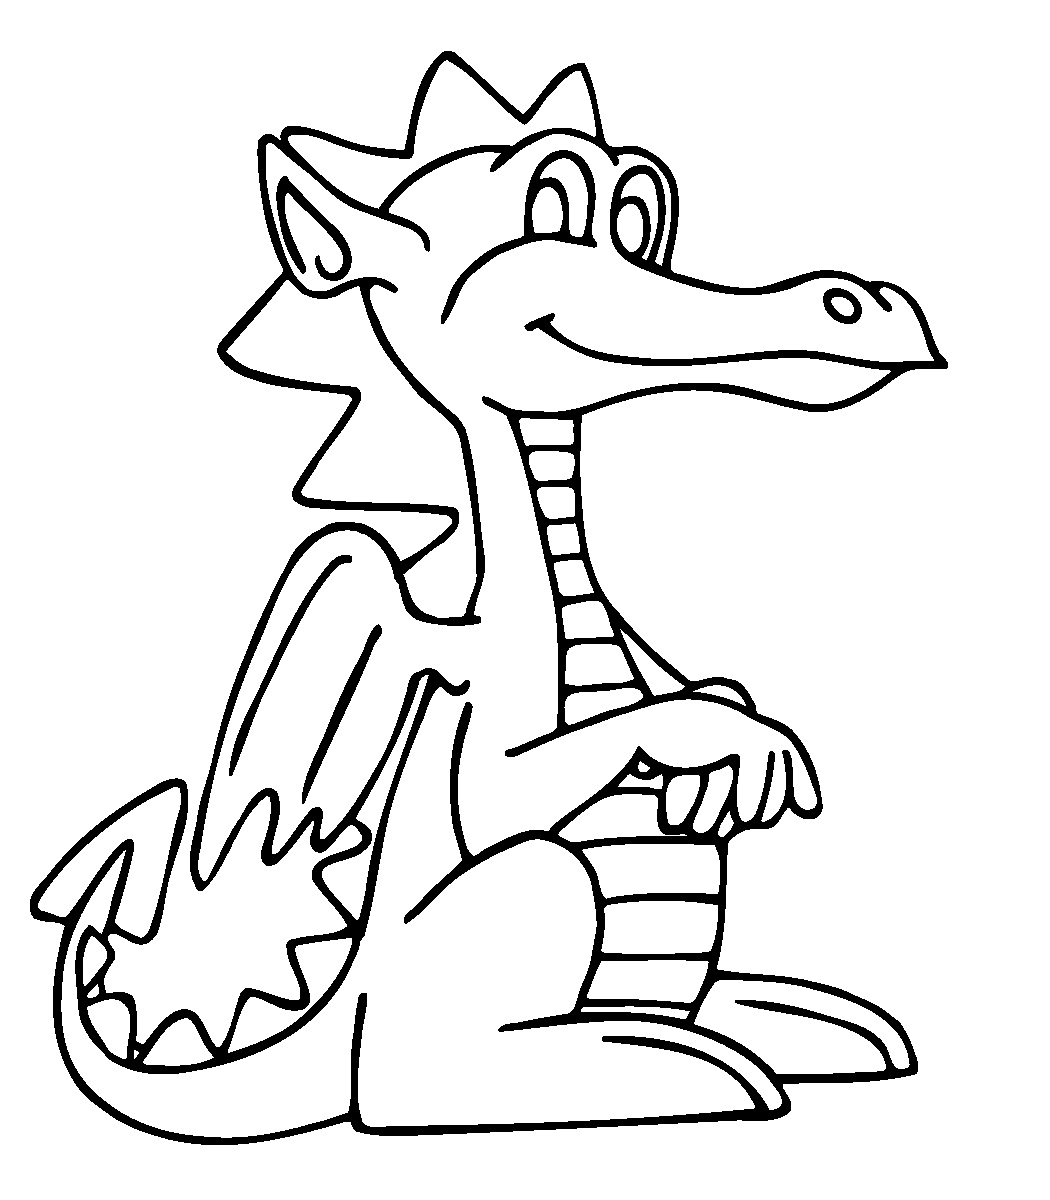 dragons clipart black and white kid